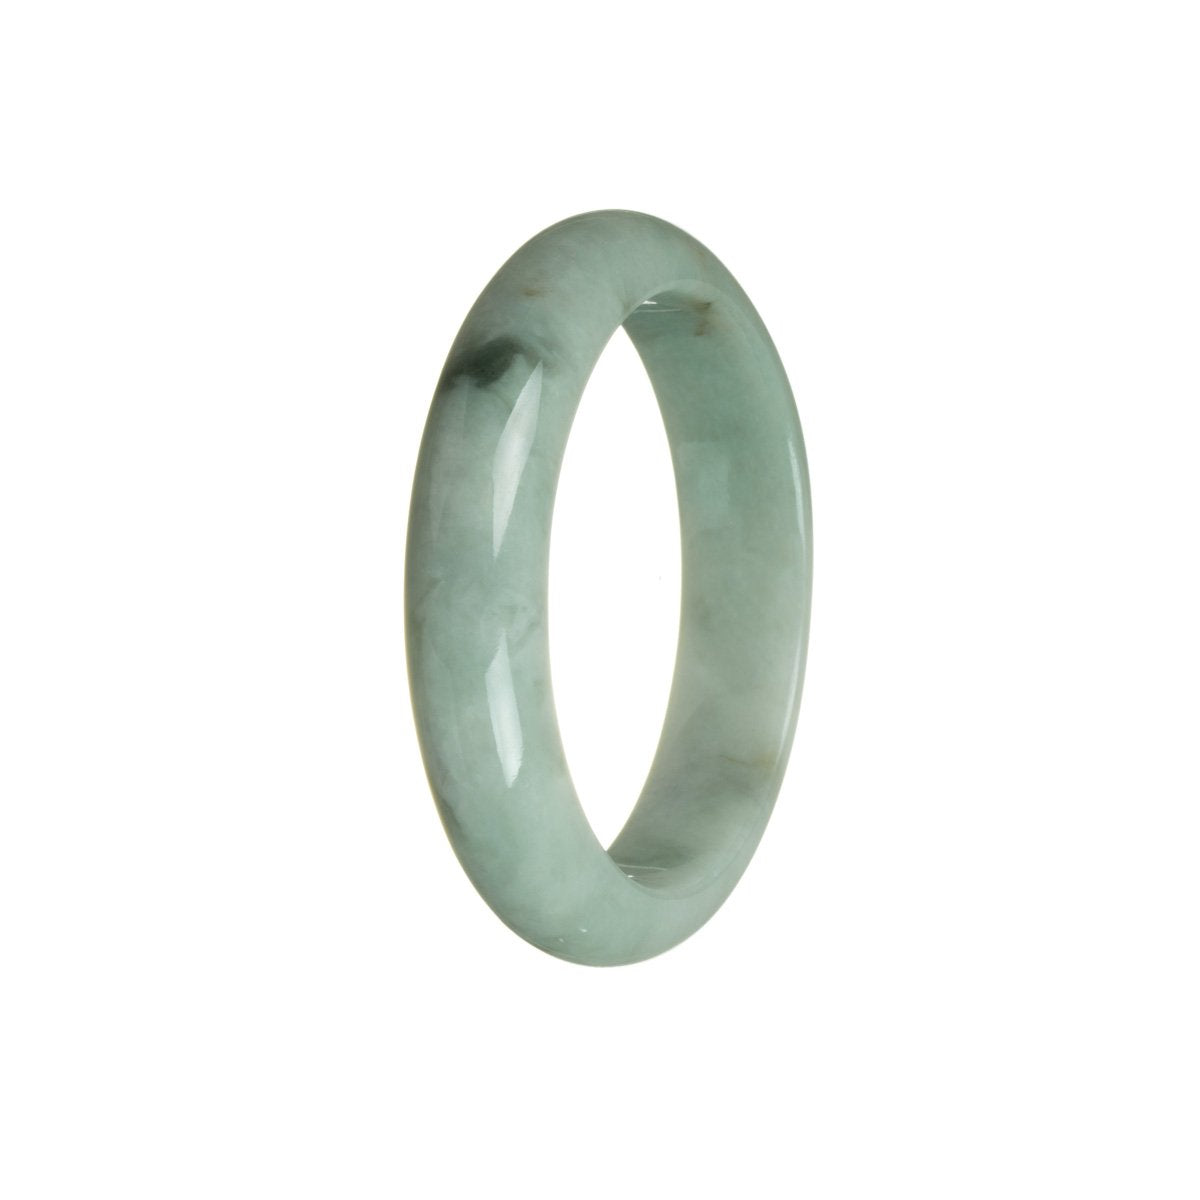 A close-up photo of a genuine Type A Bluish Green Burmese Jade bangle bracelet. The bracelet is shaped like a half moon and measures 56mm in size. It features a smooth, polished surface and showcases the beautiful natural color and texture of the jade. Perfect for adding a touch of elegance to any outfit.